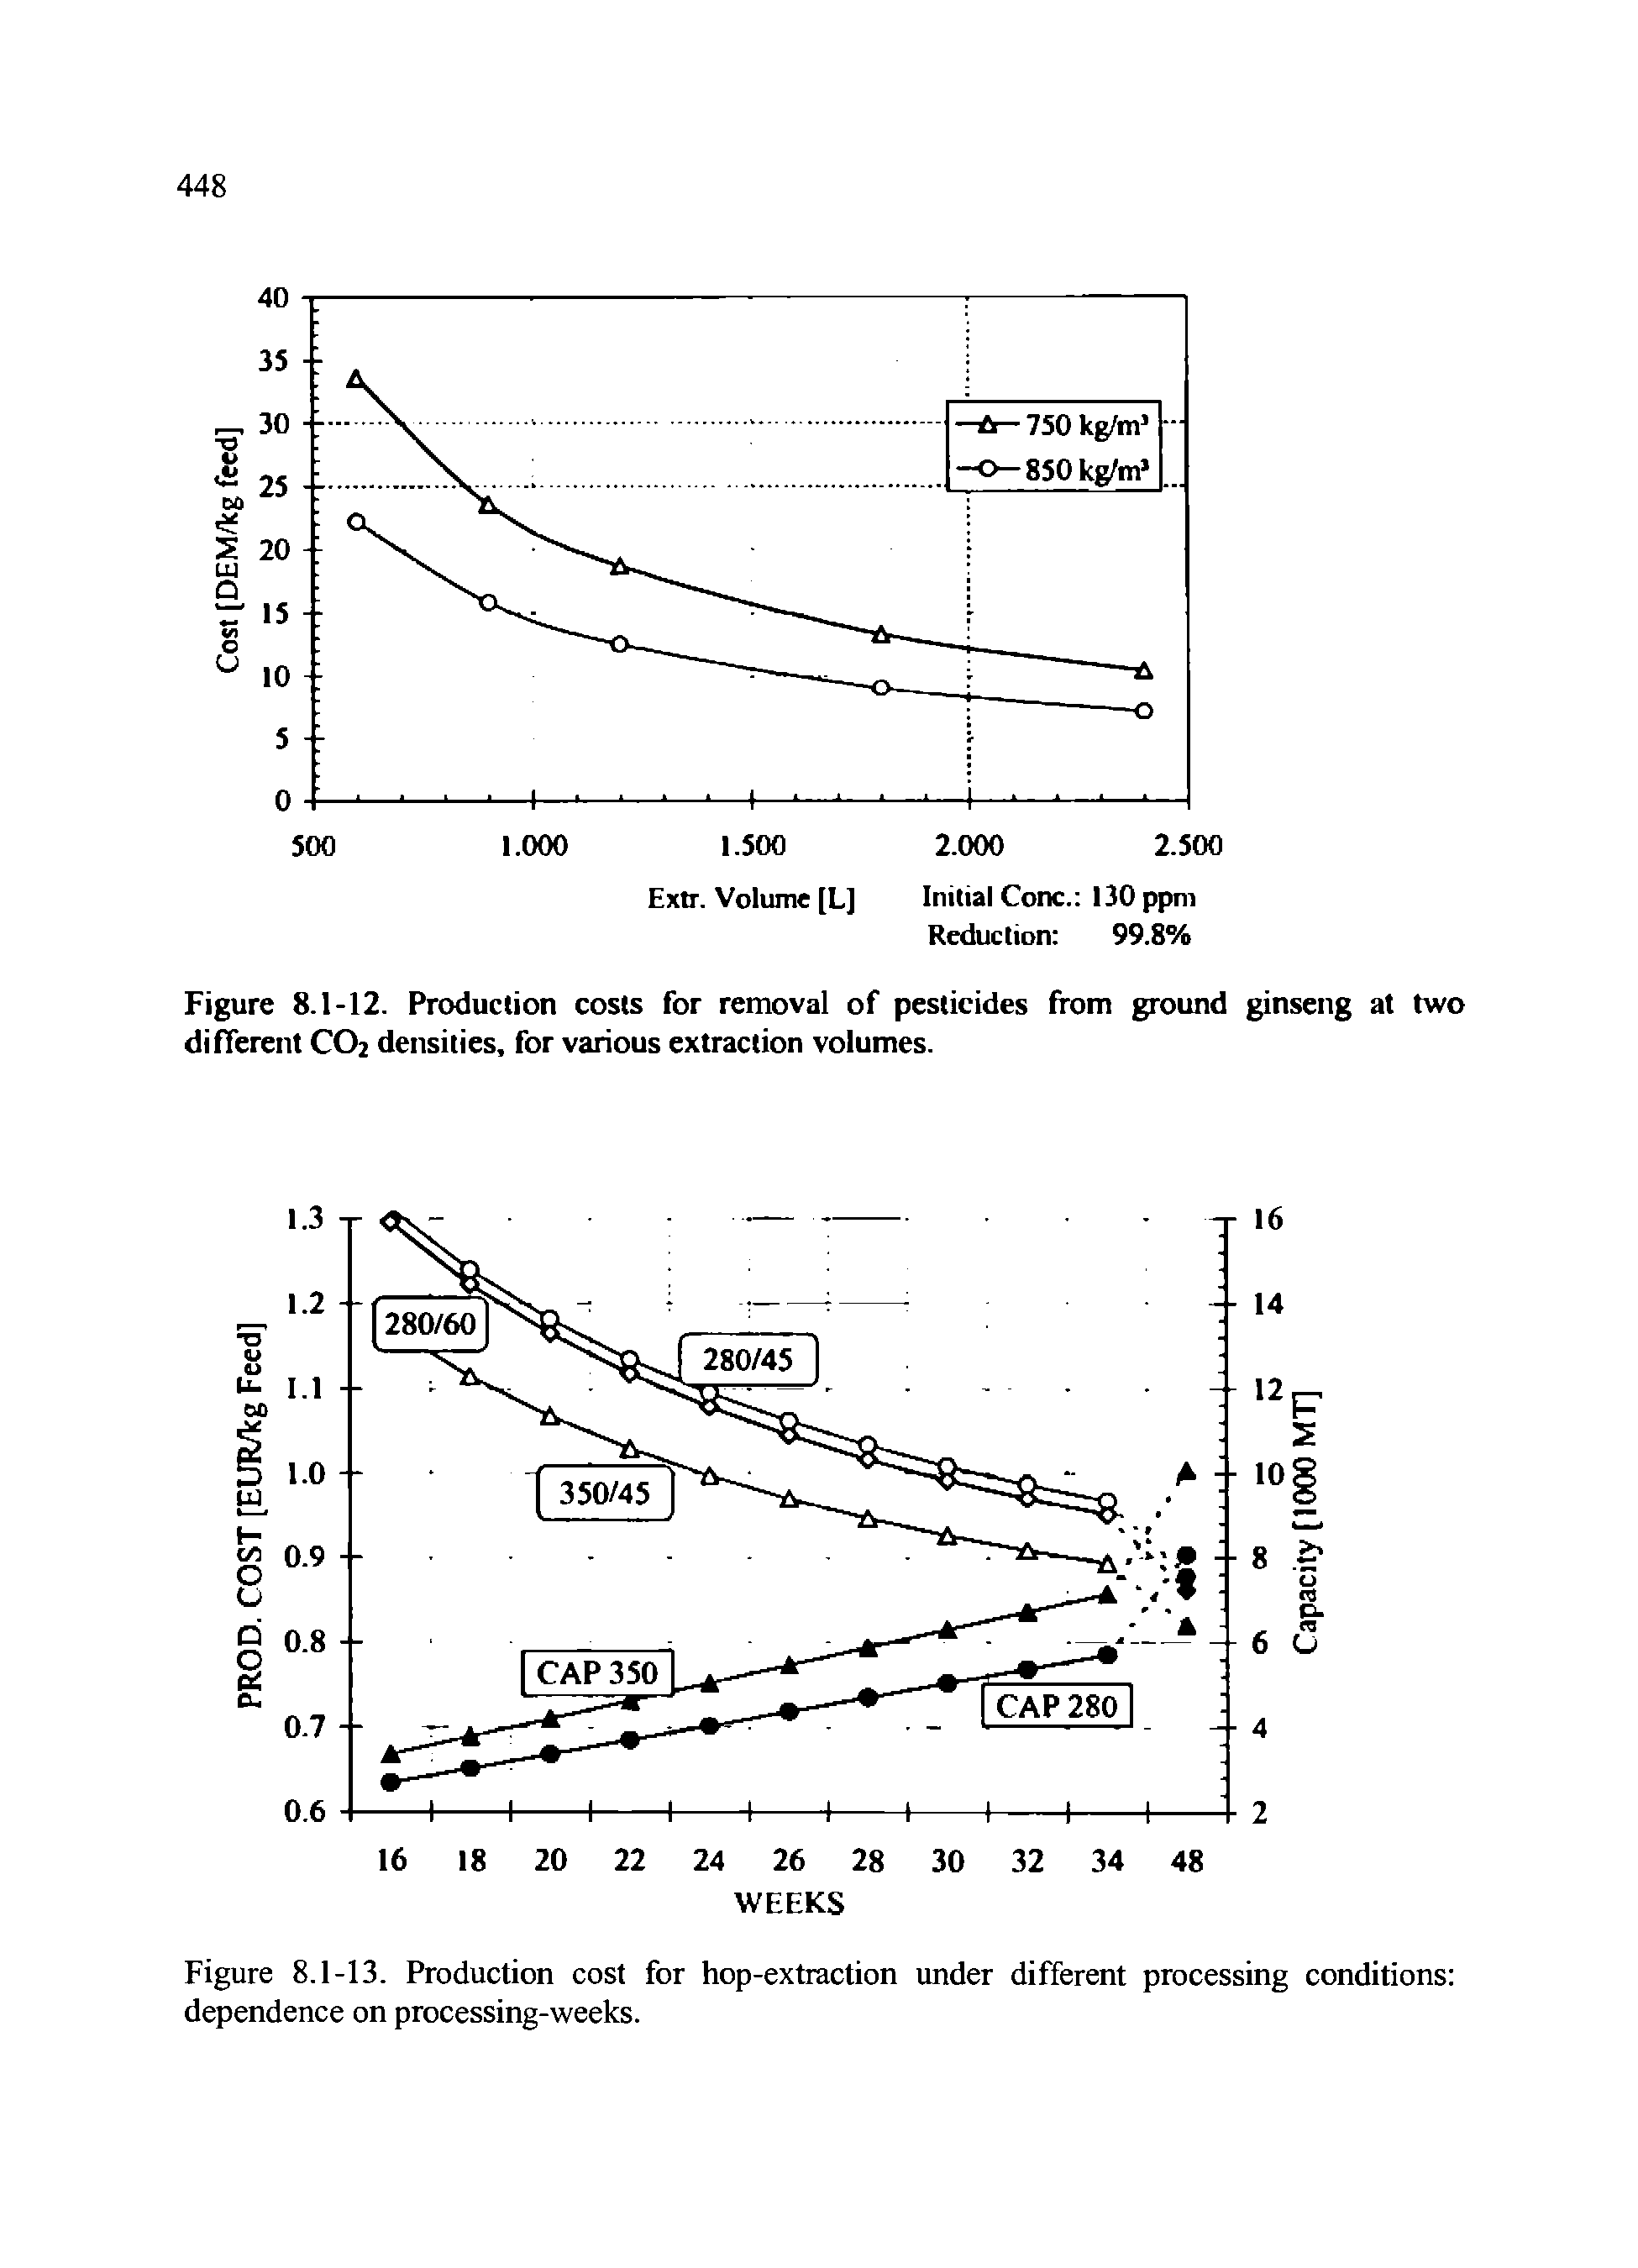 Figure 8.1-12. Production costs for removal of pesticides from ground ginseng at two different CO2 densities, for various extraction volumes.